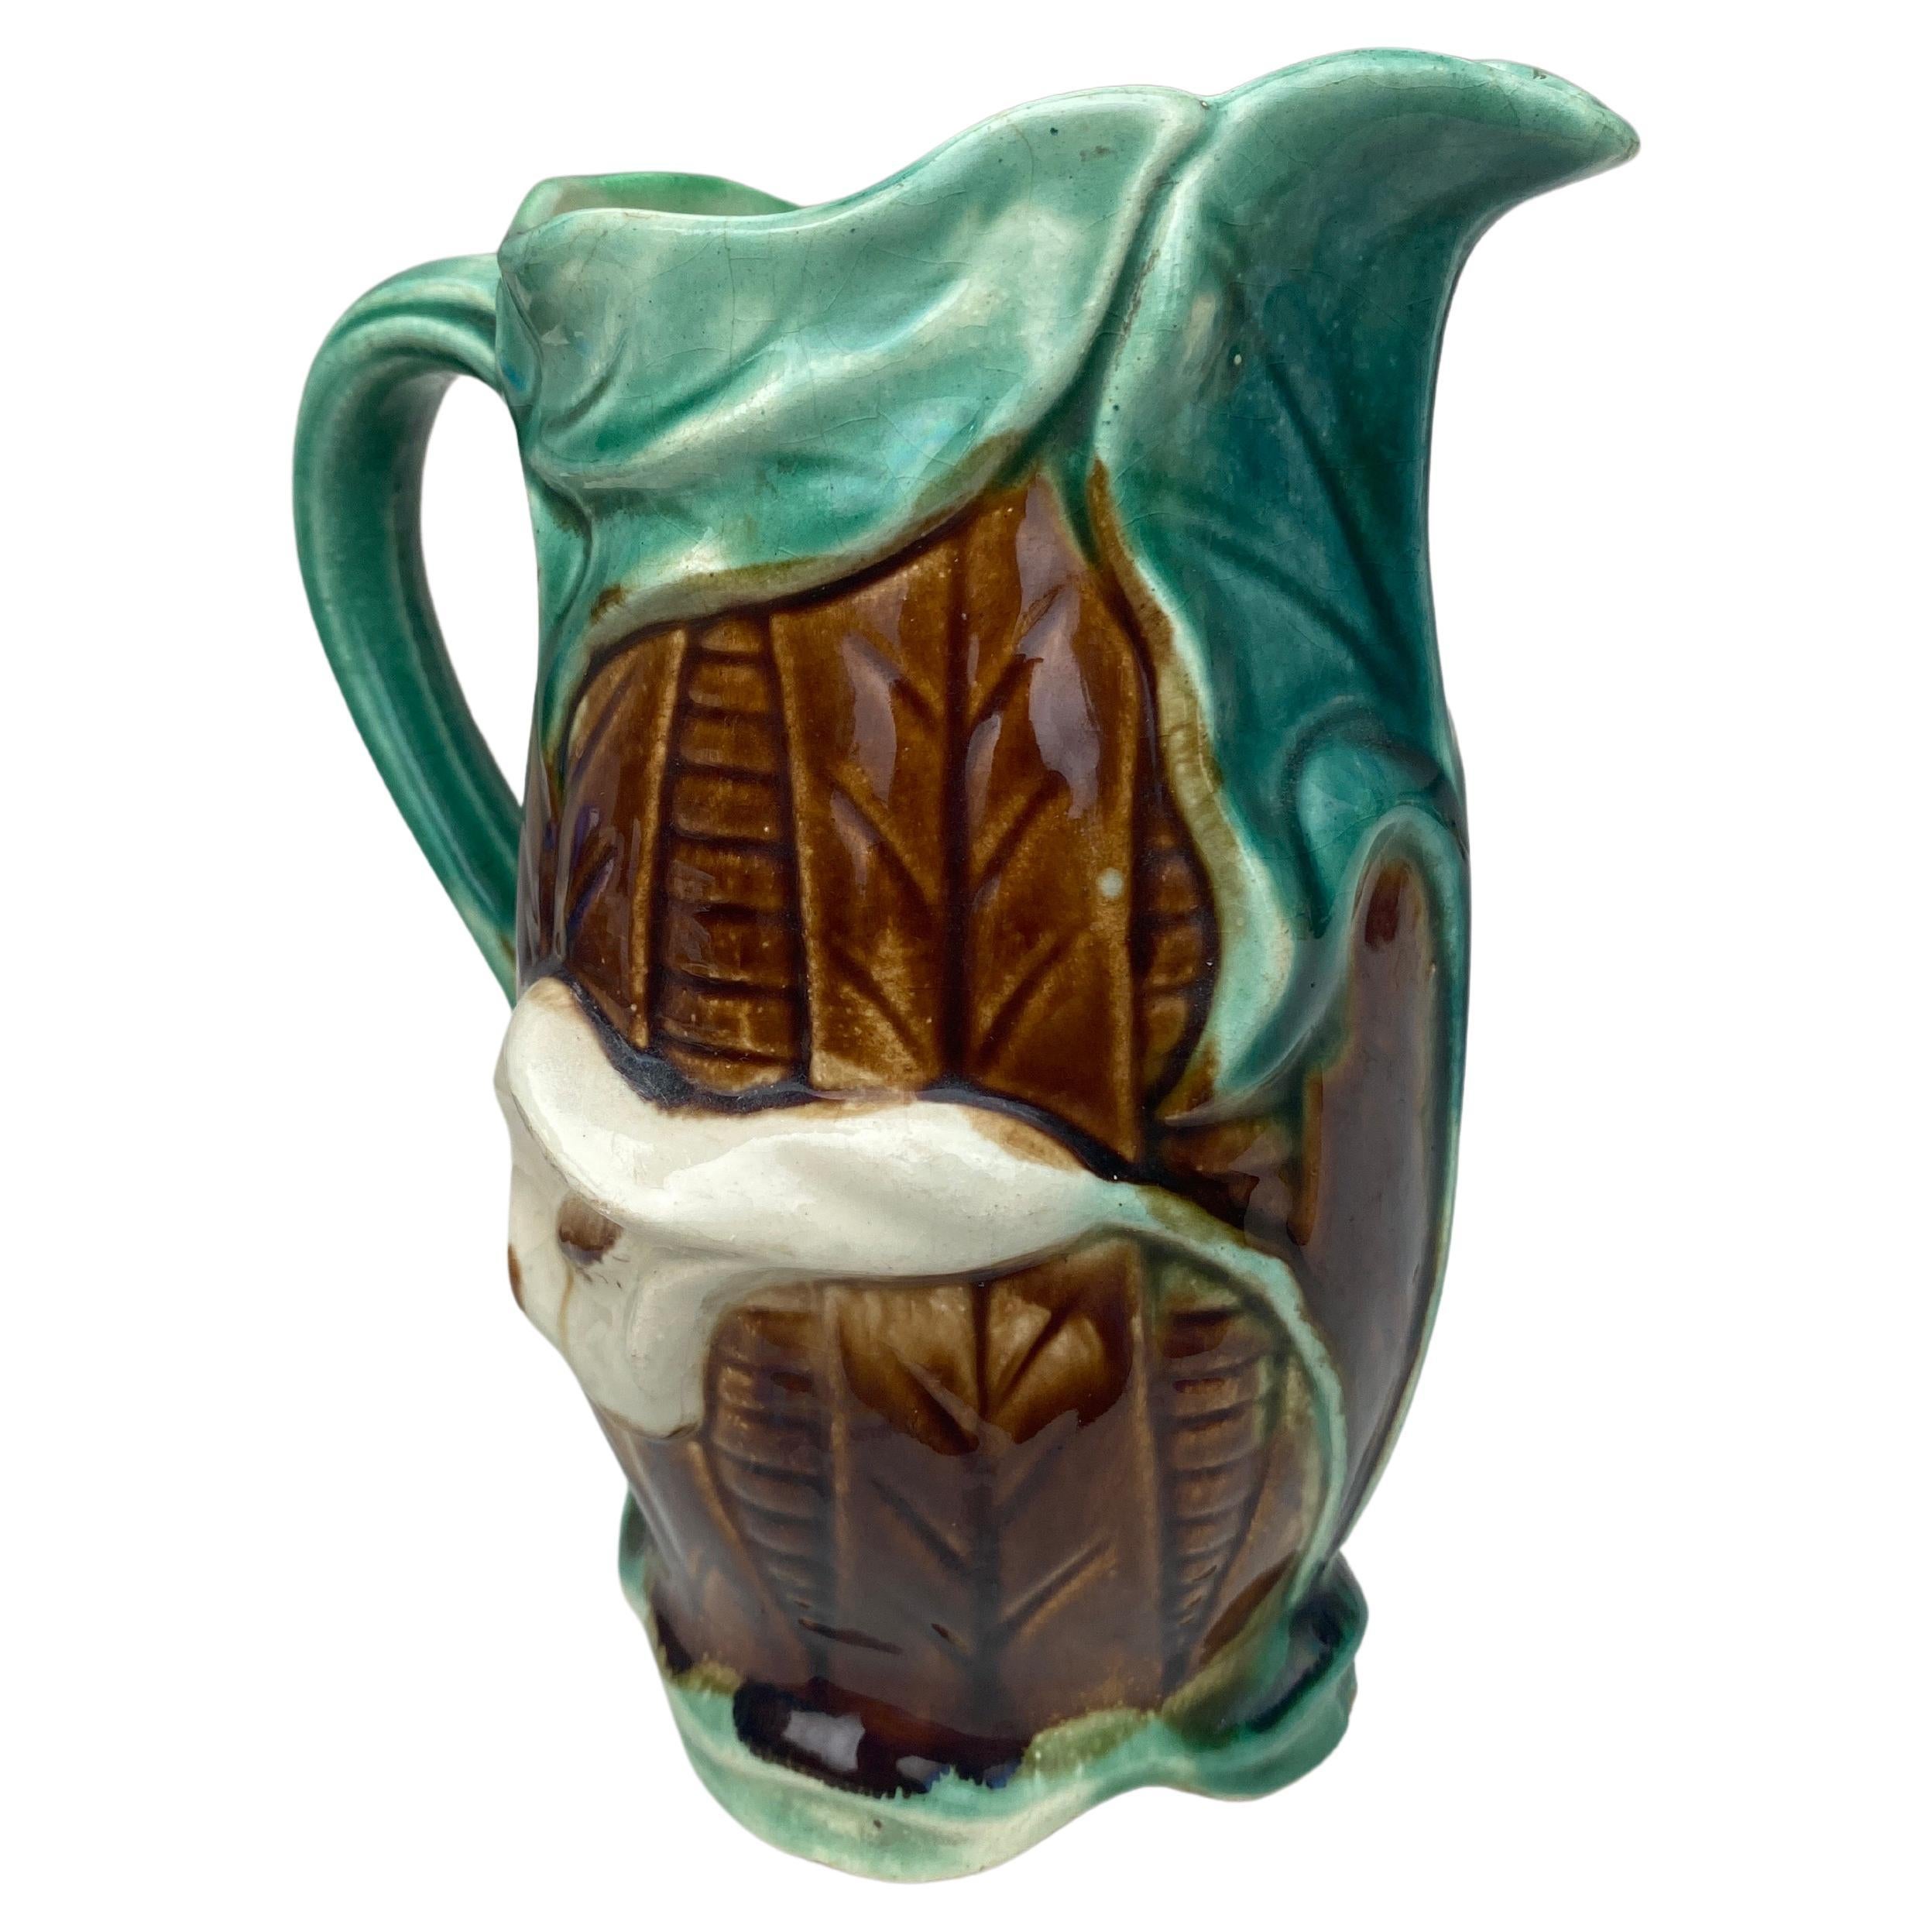 French Majolica arum pitcher circa 1890 from North of France.
Art Nouveau.